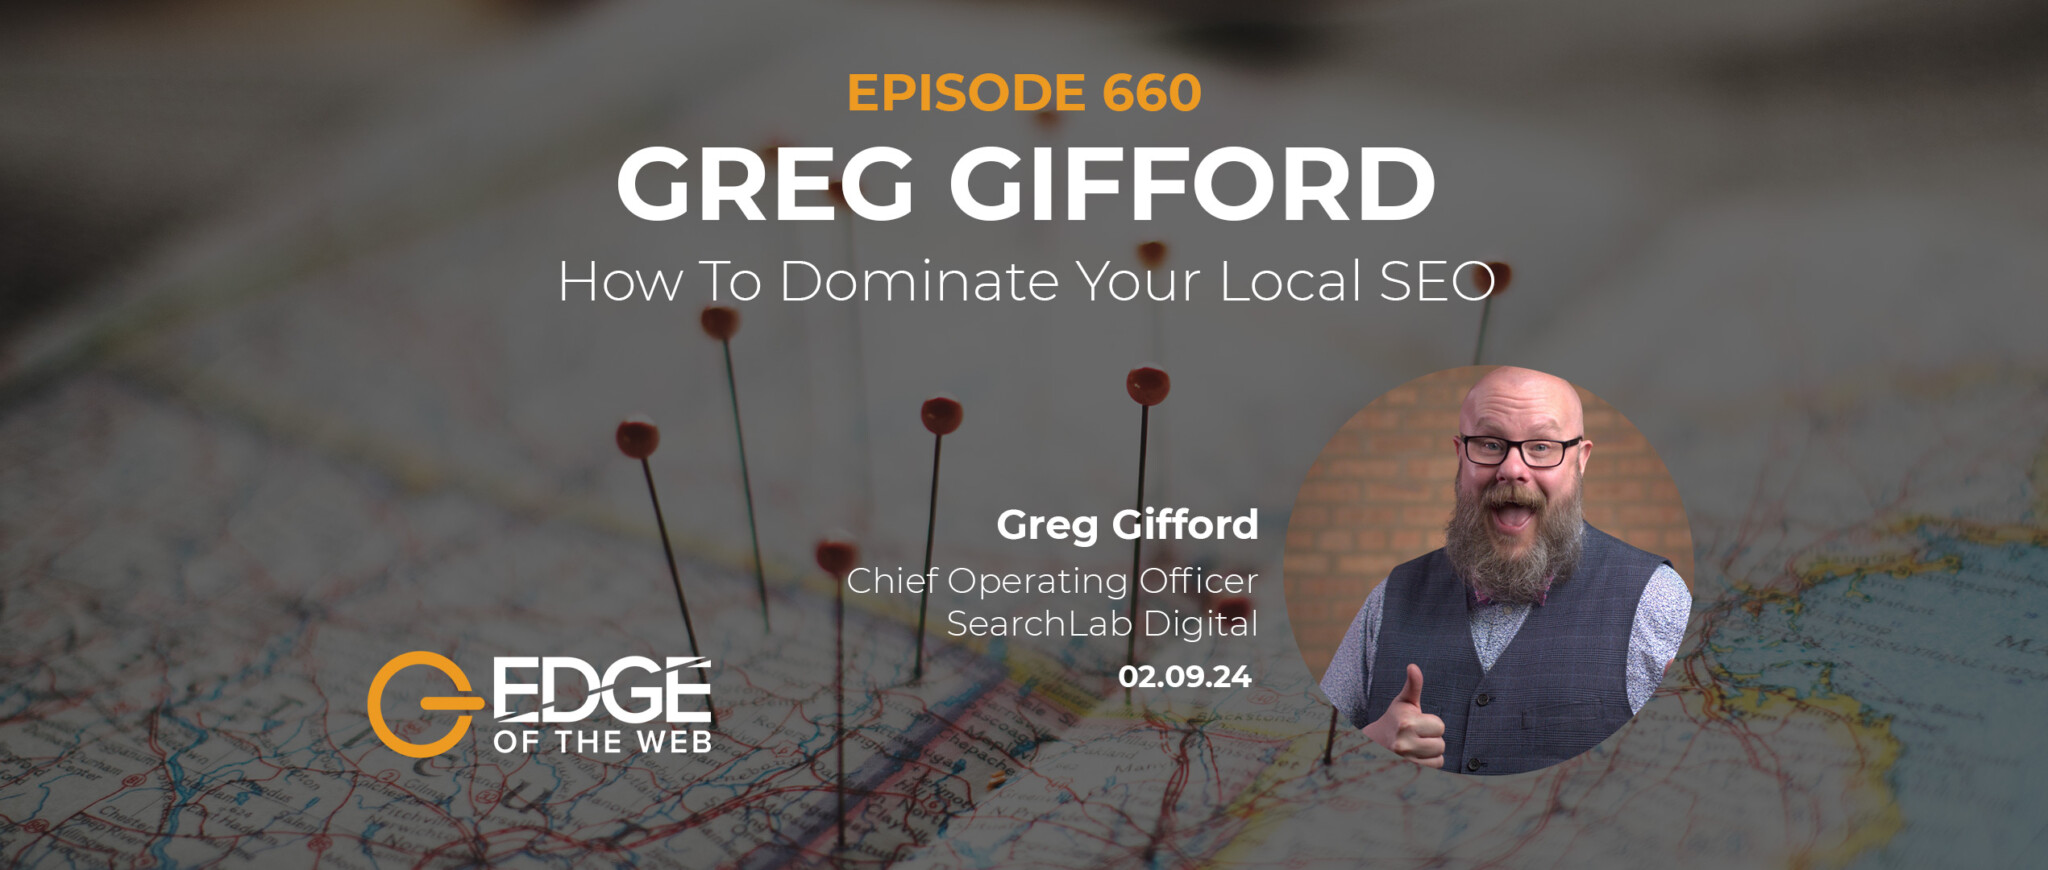 Episode 660: How To Dominate Your Local SEO w/ Greg Gifford